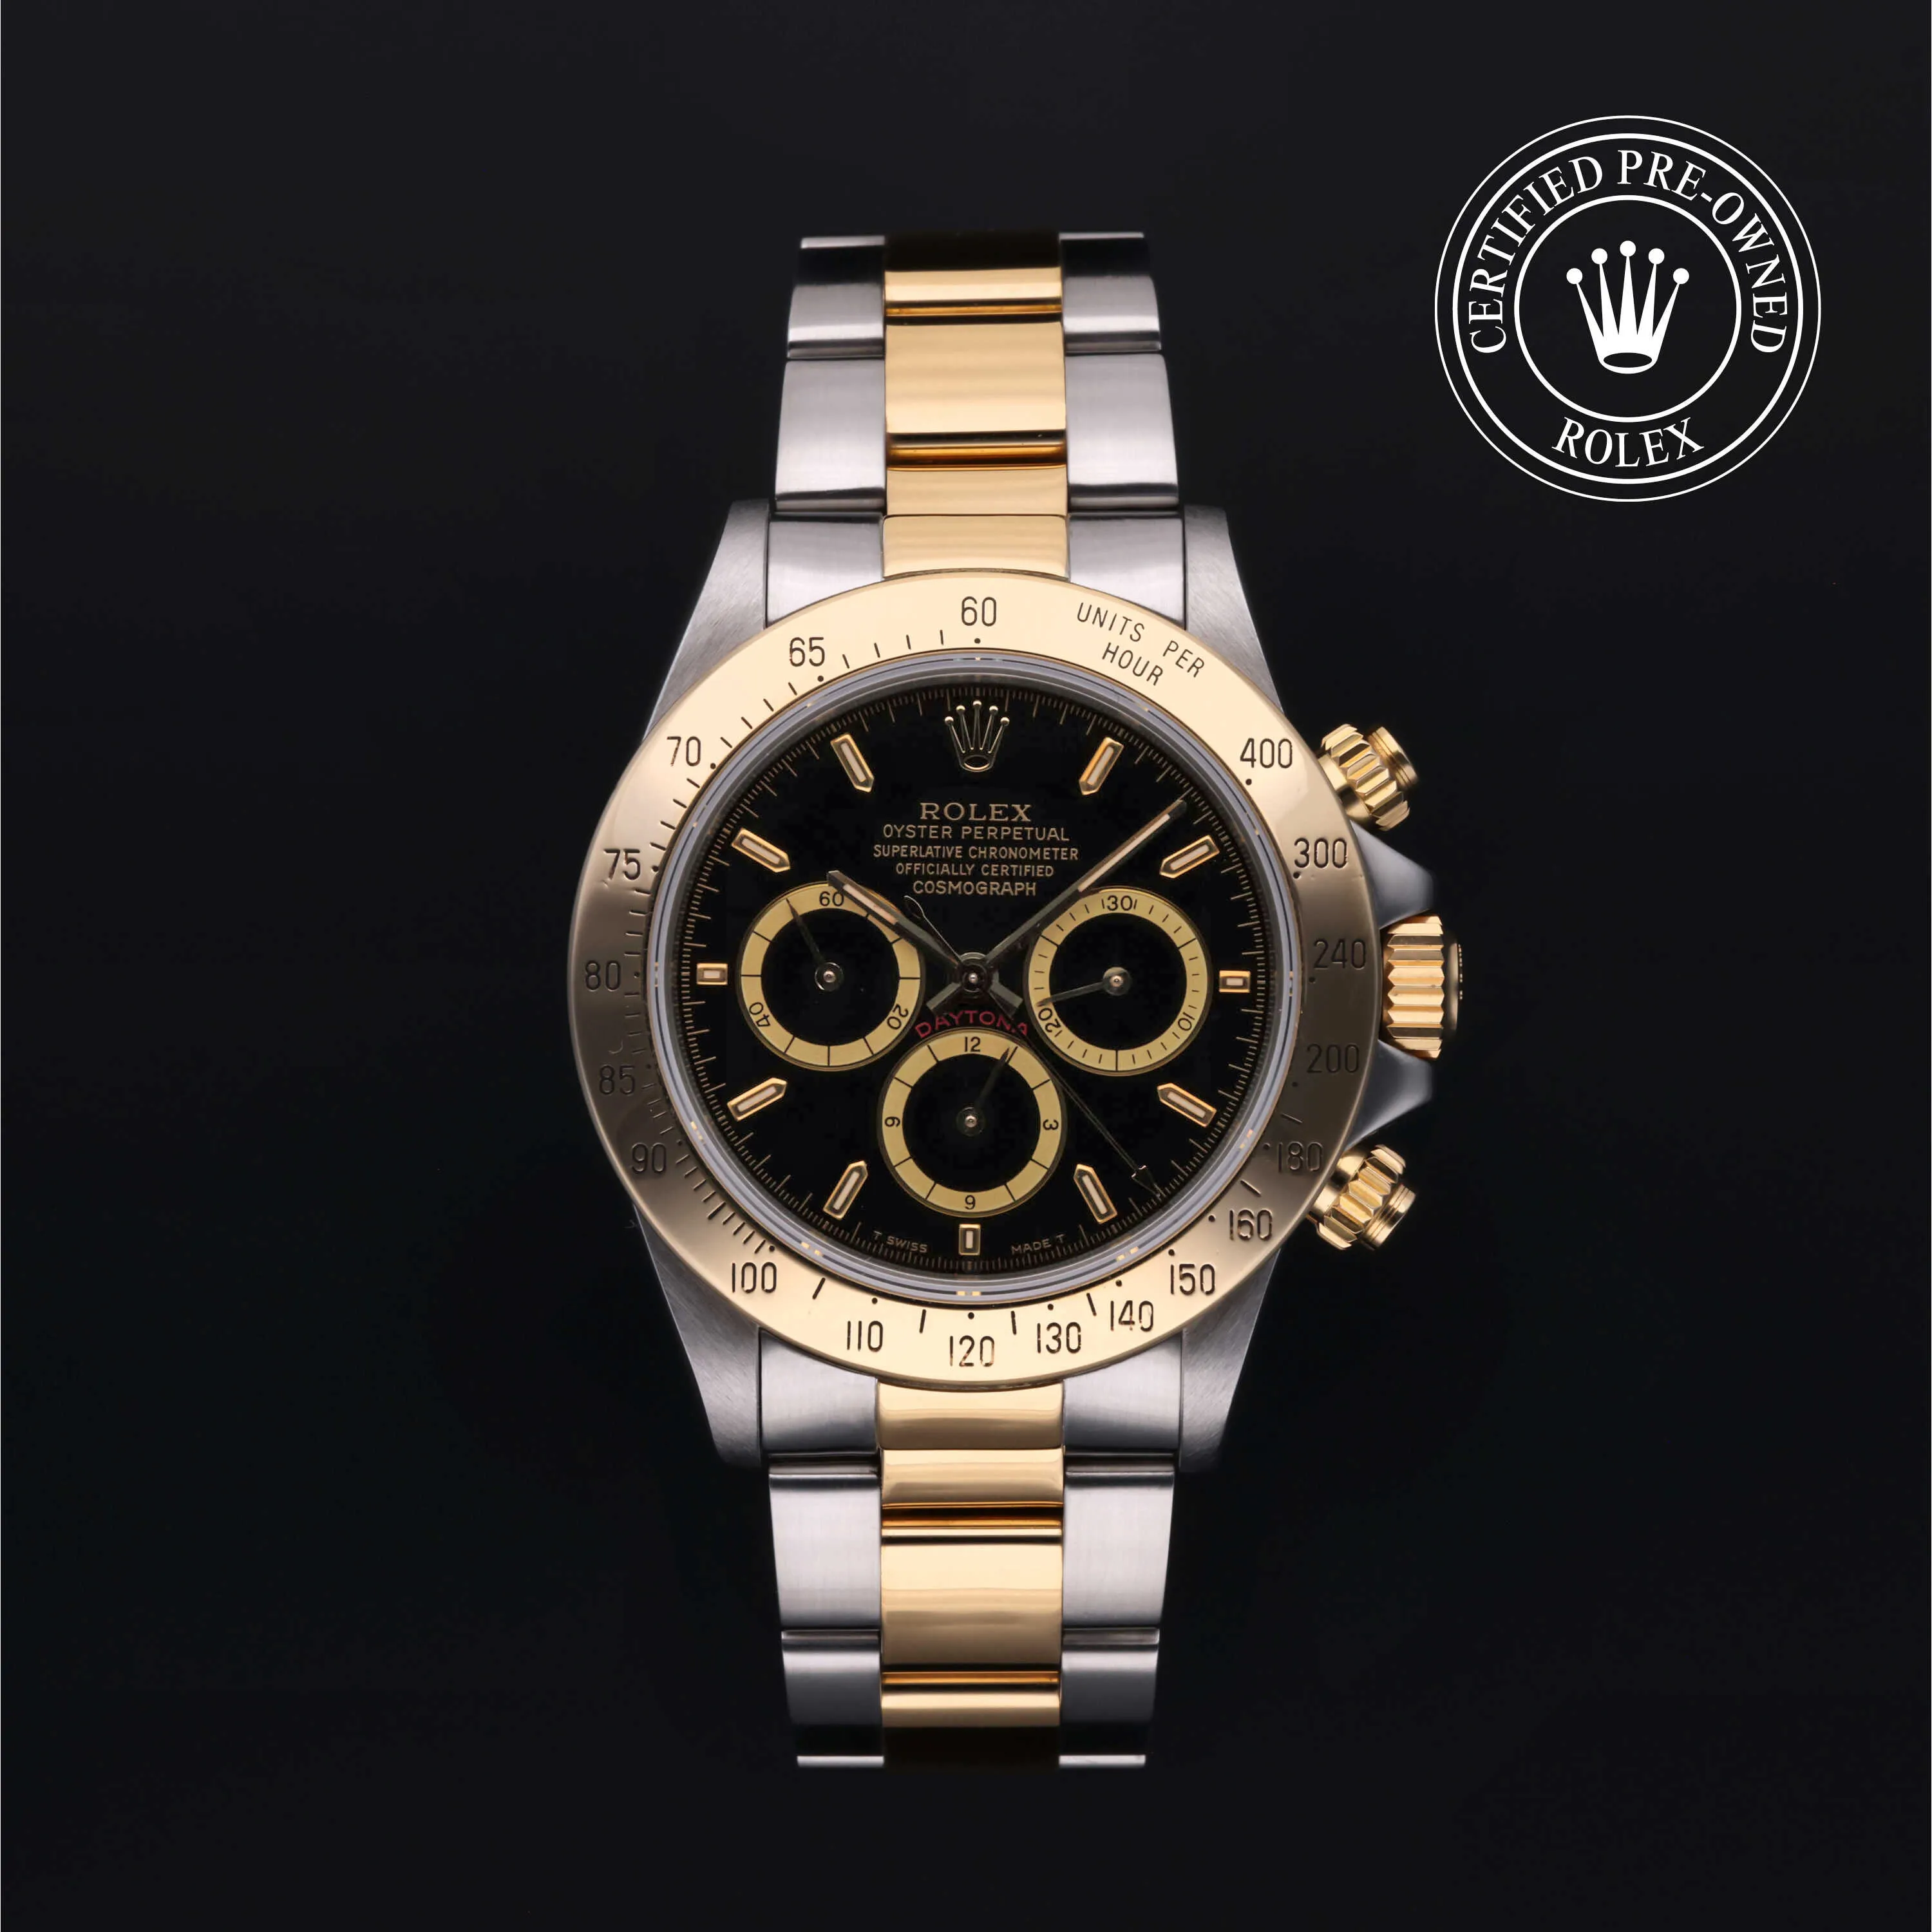 Rolex Cosmograph Daytona 16523 40mm Yellow gold and stainless steel Black